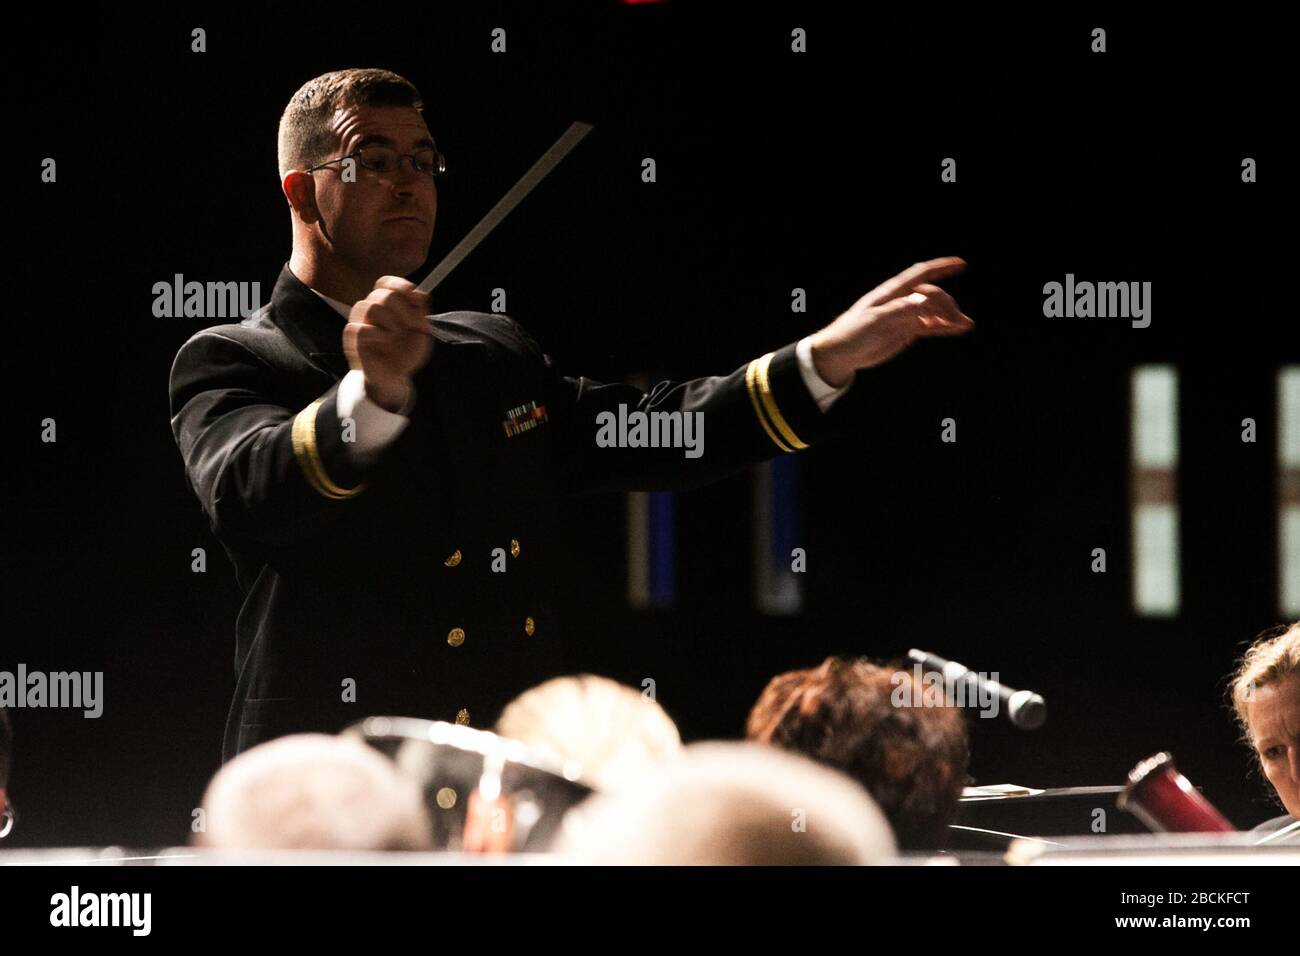 '131022-N-HG258-004 ASHBURN, VA (October 22, 2013) Lt. j.g. Bruce Mansfield, associate conductor with the United States Navy Band, directs the band during a daytime concert at Stonebridge H.S. in Ashburn, Va,. as part of it's Music in the Schools program. Music in the Schools is designed to supplement music education curricula and build bridges between the Navy and younger generations. (U.S. Navy Photo by MUC Stephen Hassay/Released); 23 October 2013, 10:50; Navy Band Music in the Schools at Stonebridge H.S. in Ashburn, Va.; United States Navy Band from Washington, D.C., USA; ' Stock Photo